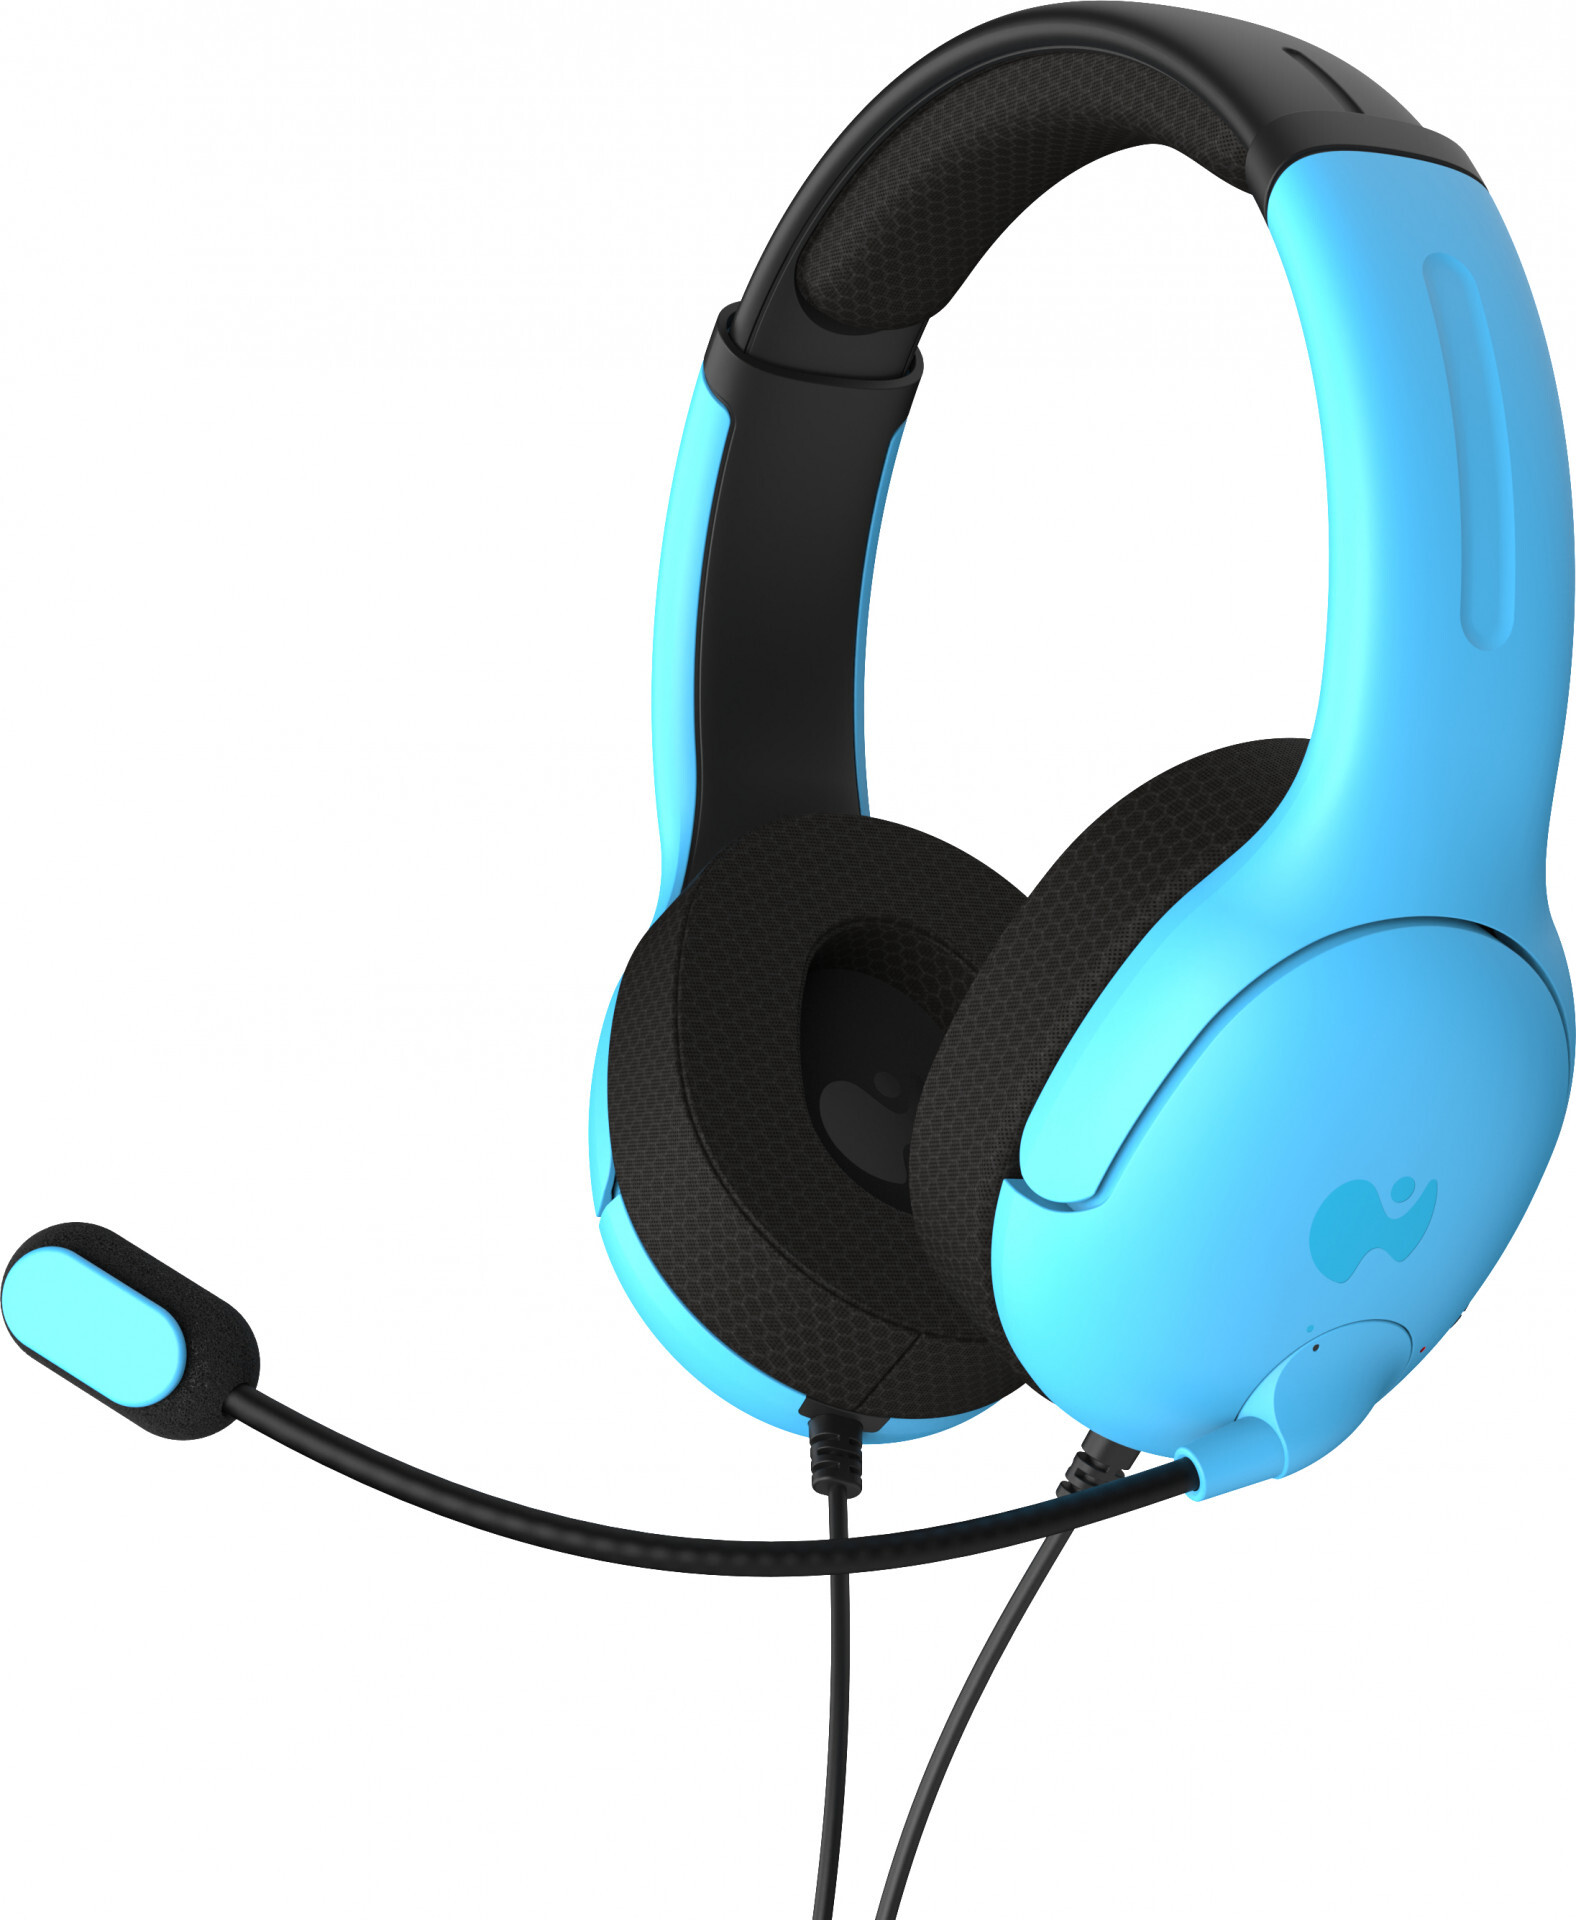 PDP PDP Gaming Airlite Wired Stereo Headset - Neptune Blue